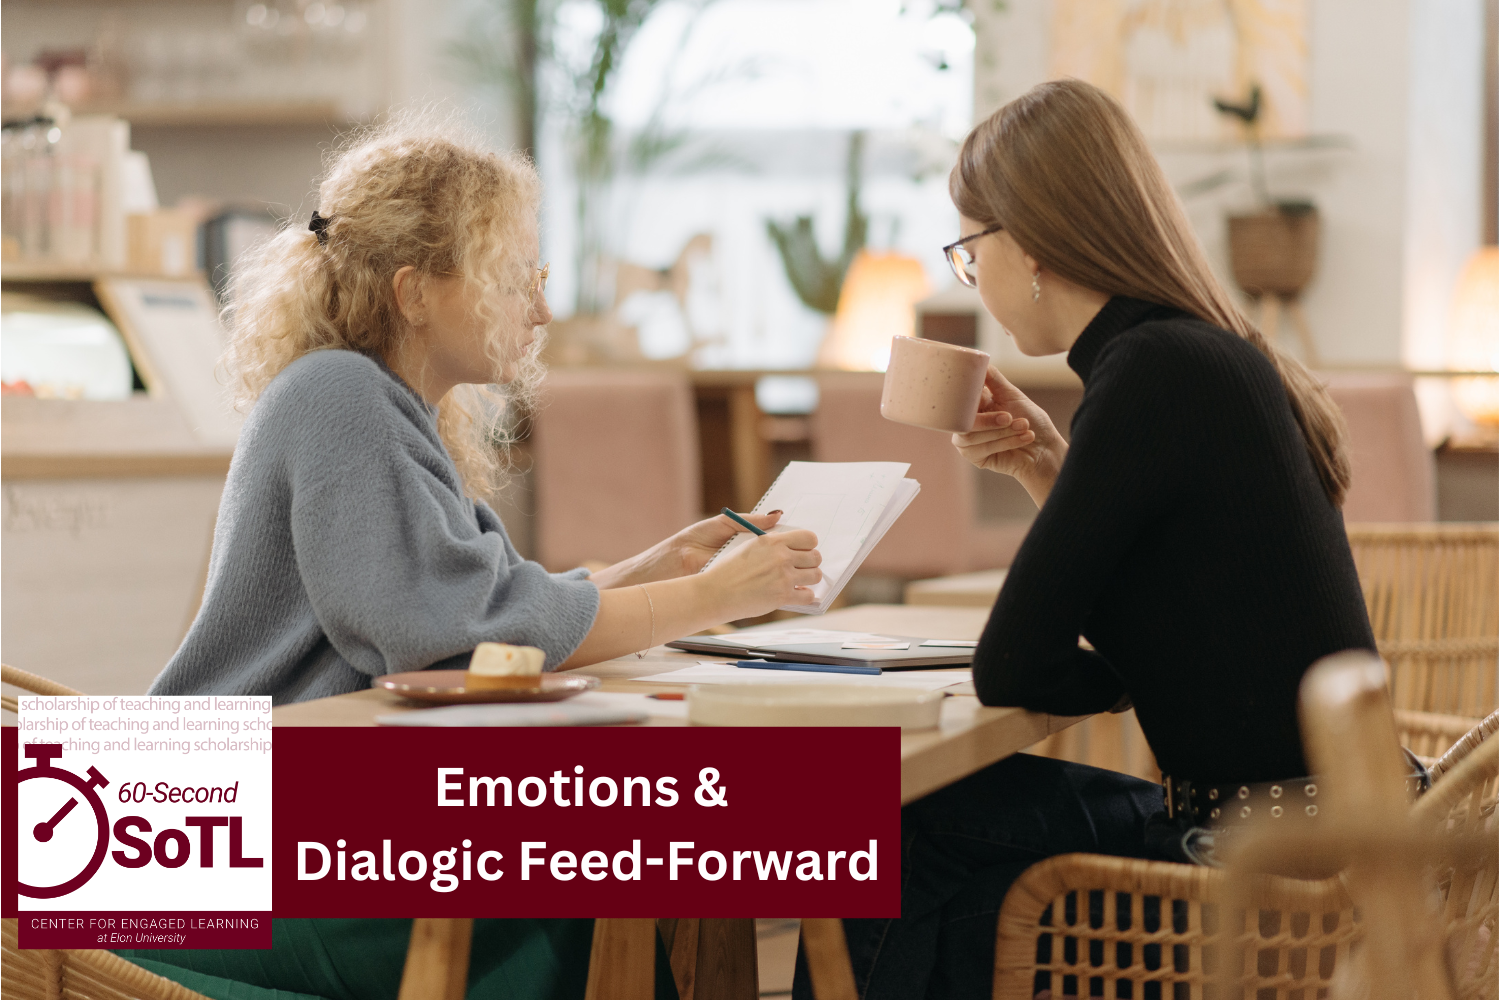 Two women sit at a table. One holds a notebook, which both are looking at. The other holds a mug, poised to take a sip. An overlay reads, "60-Second SoTL: Emotions & Dialogic Feed-Forward."